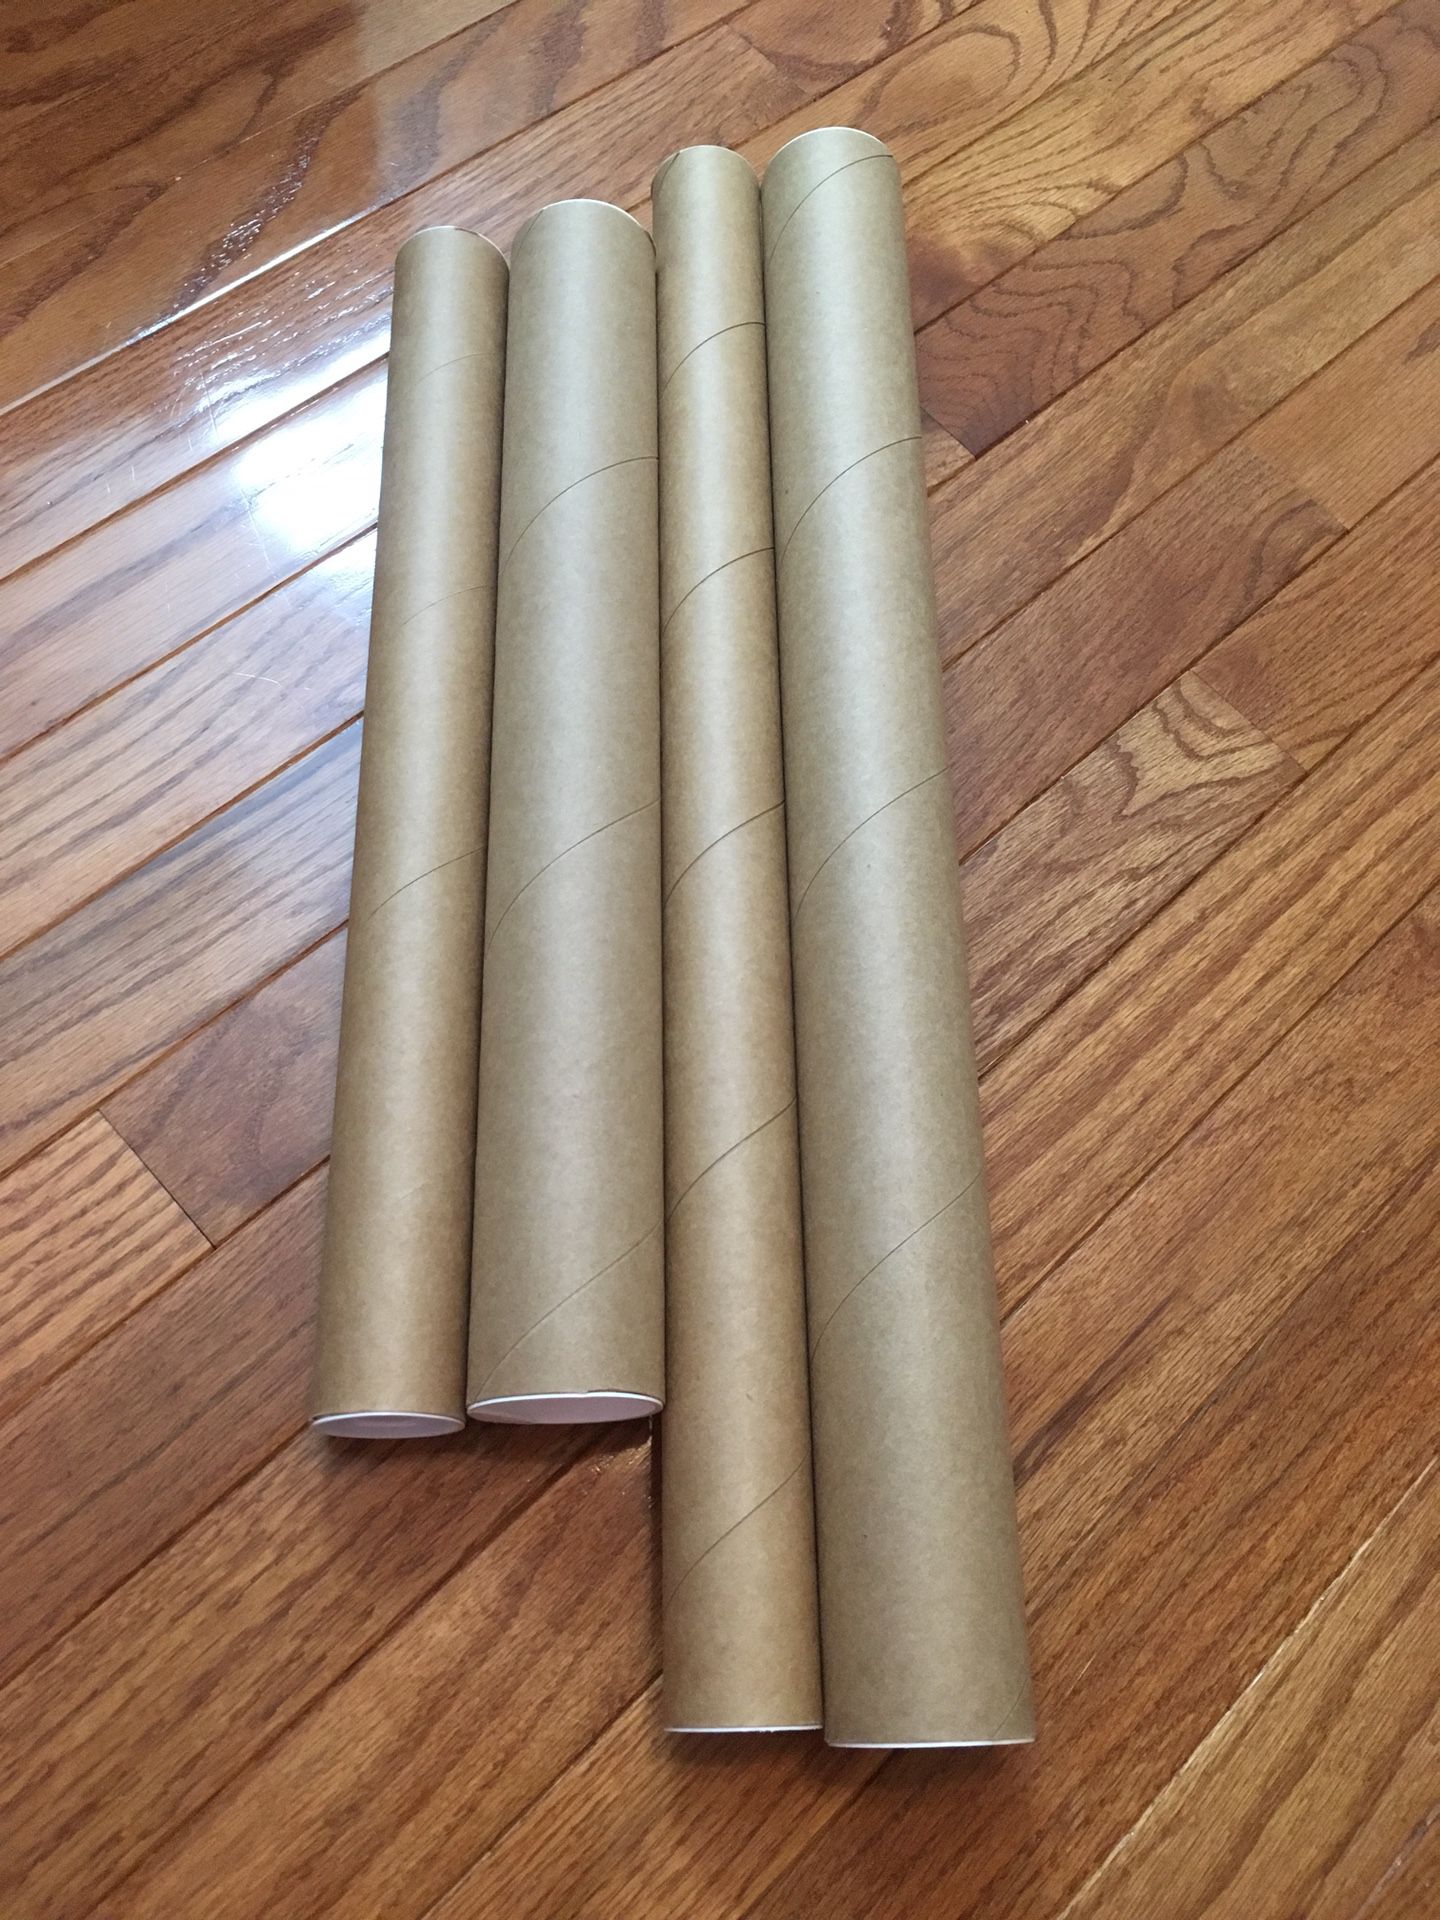 Shipping Tubes in 4 Different Sizes